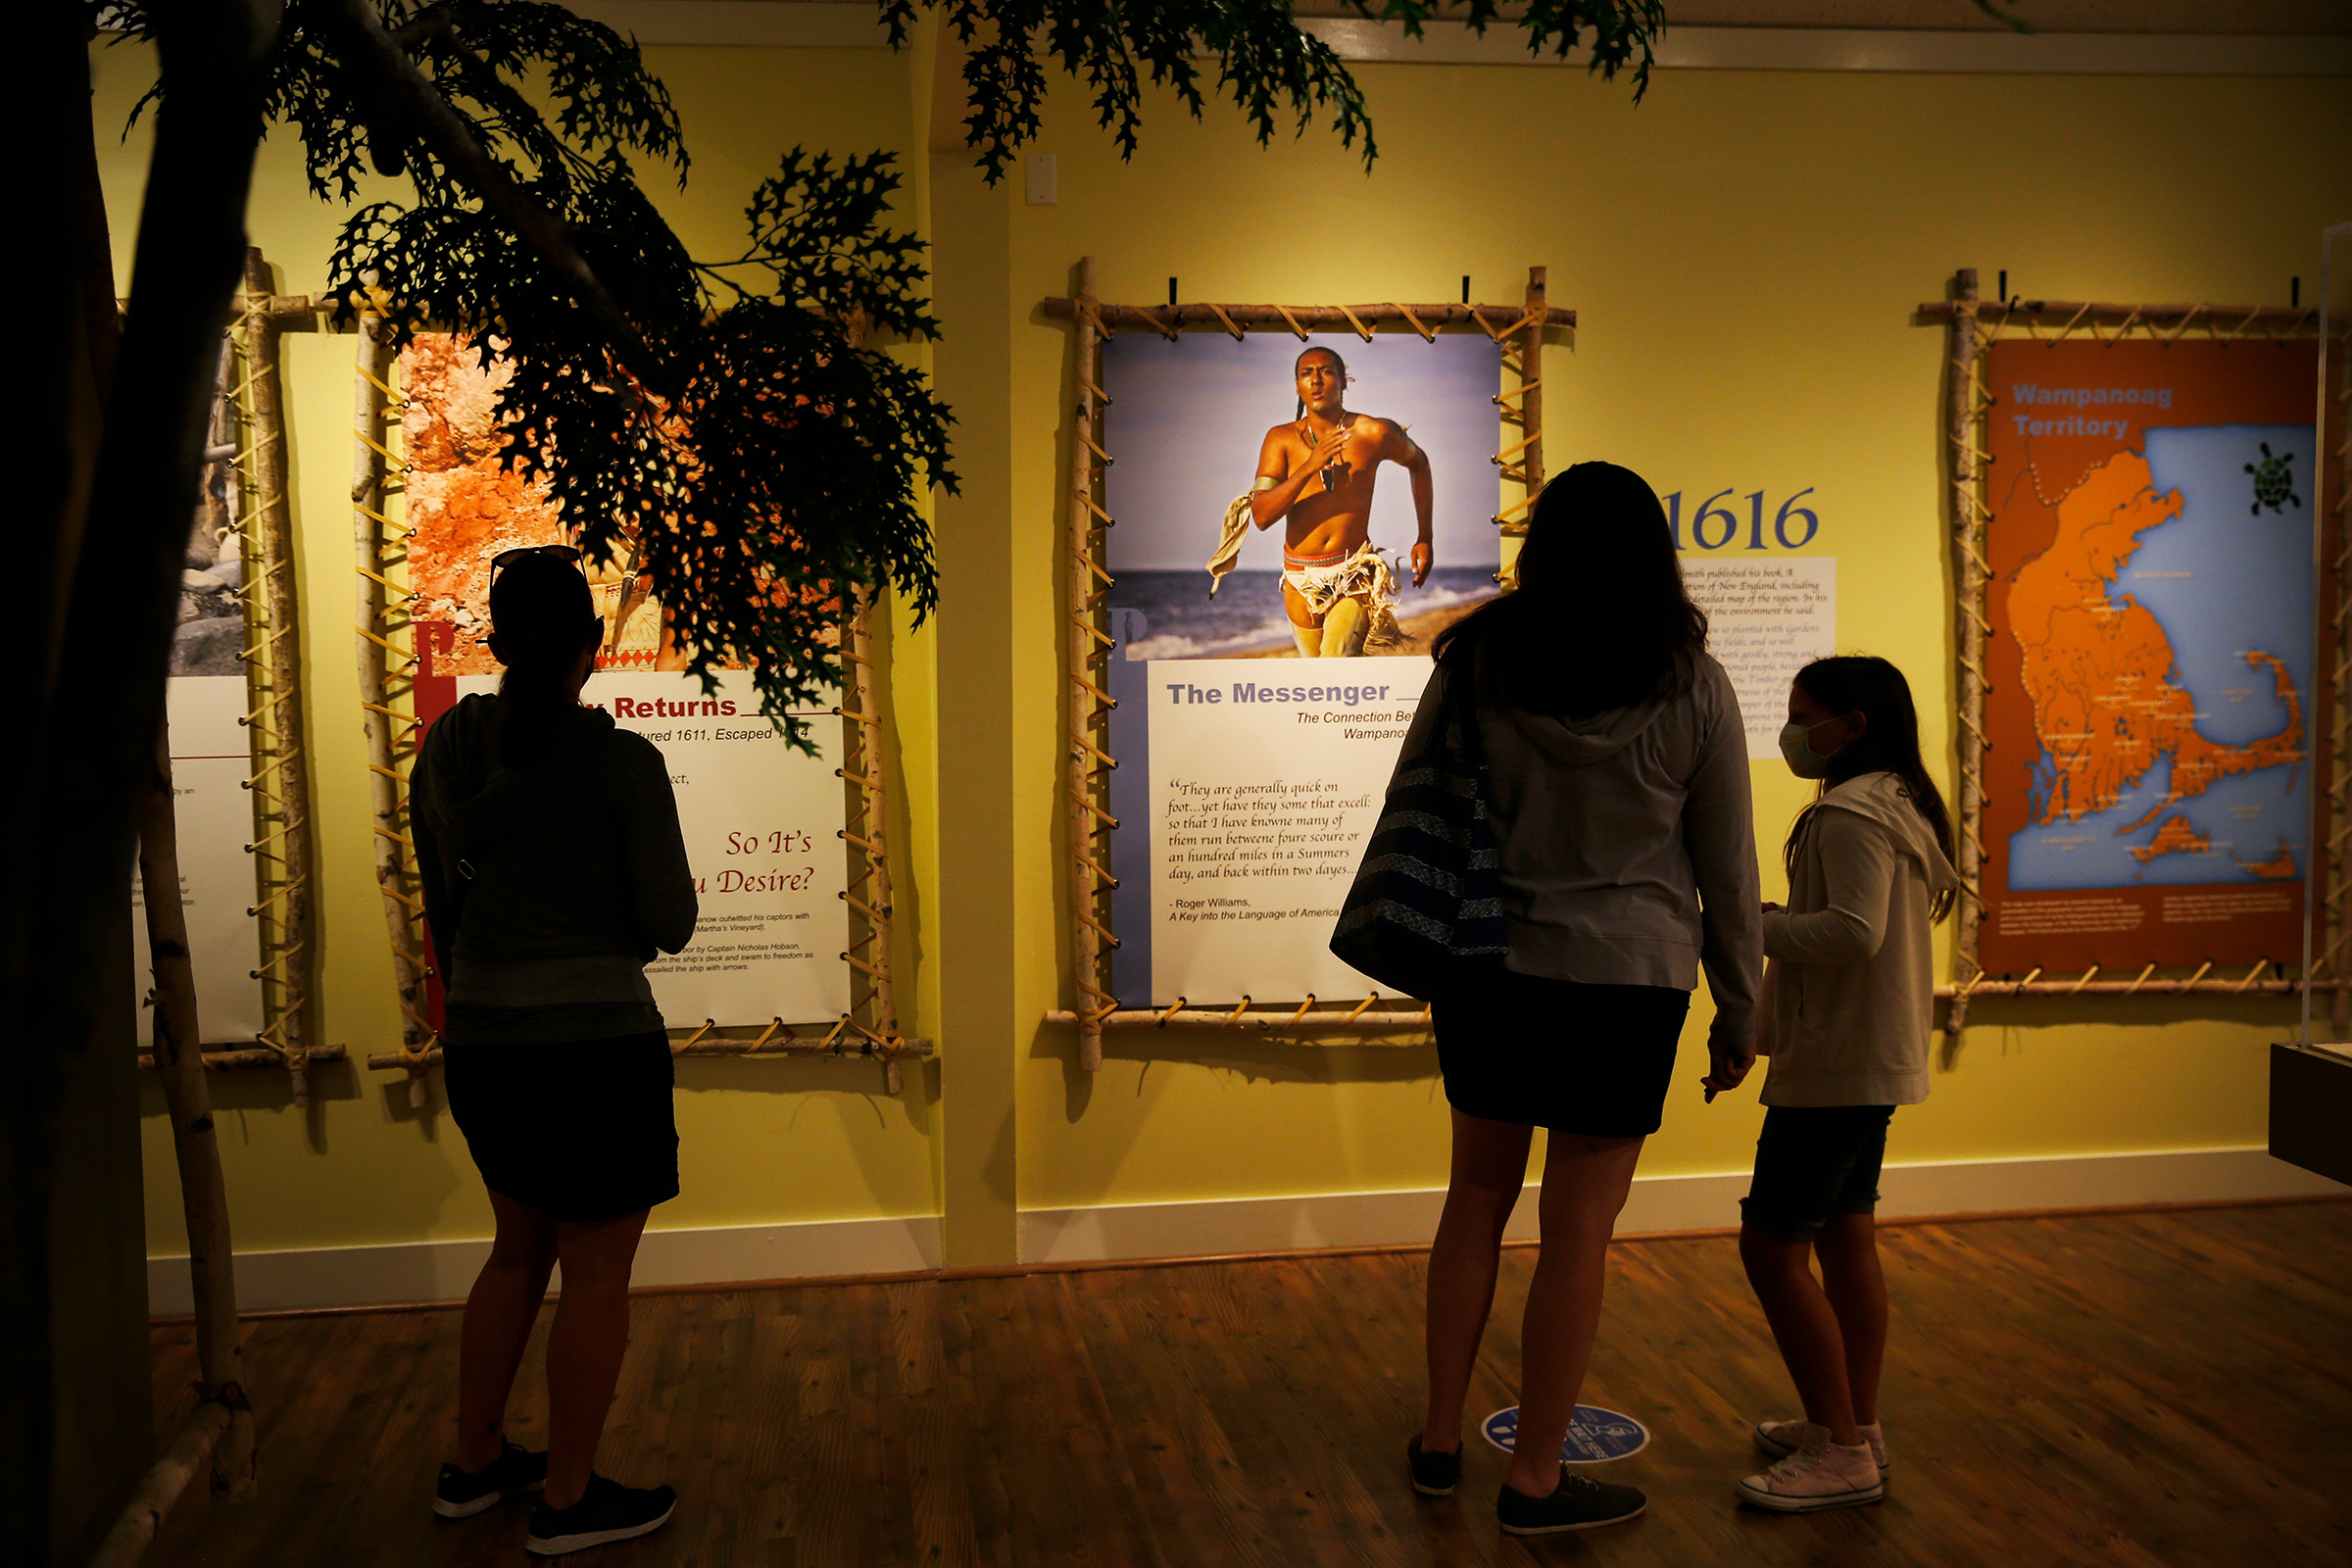 Visitors to the Pilgrim Monument and Provincetown Museum pause to examine a new exhibit about early interactions between the Pilgrims and the Wampanoag tribe in Provincetown, MA on Aug. 27. (Jessica Rinaldi—The Boston Globe/Getty Images)